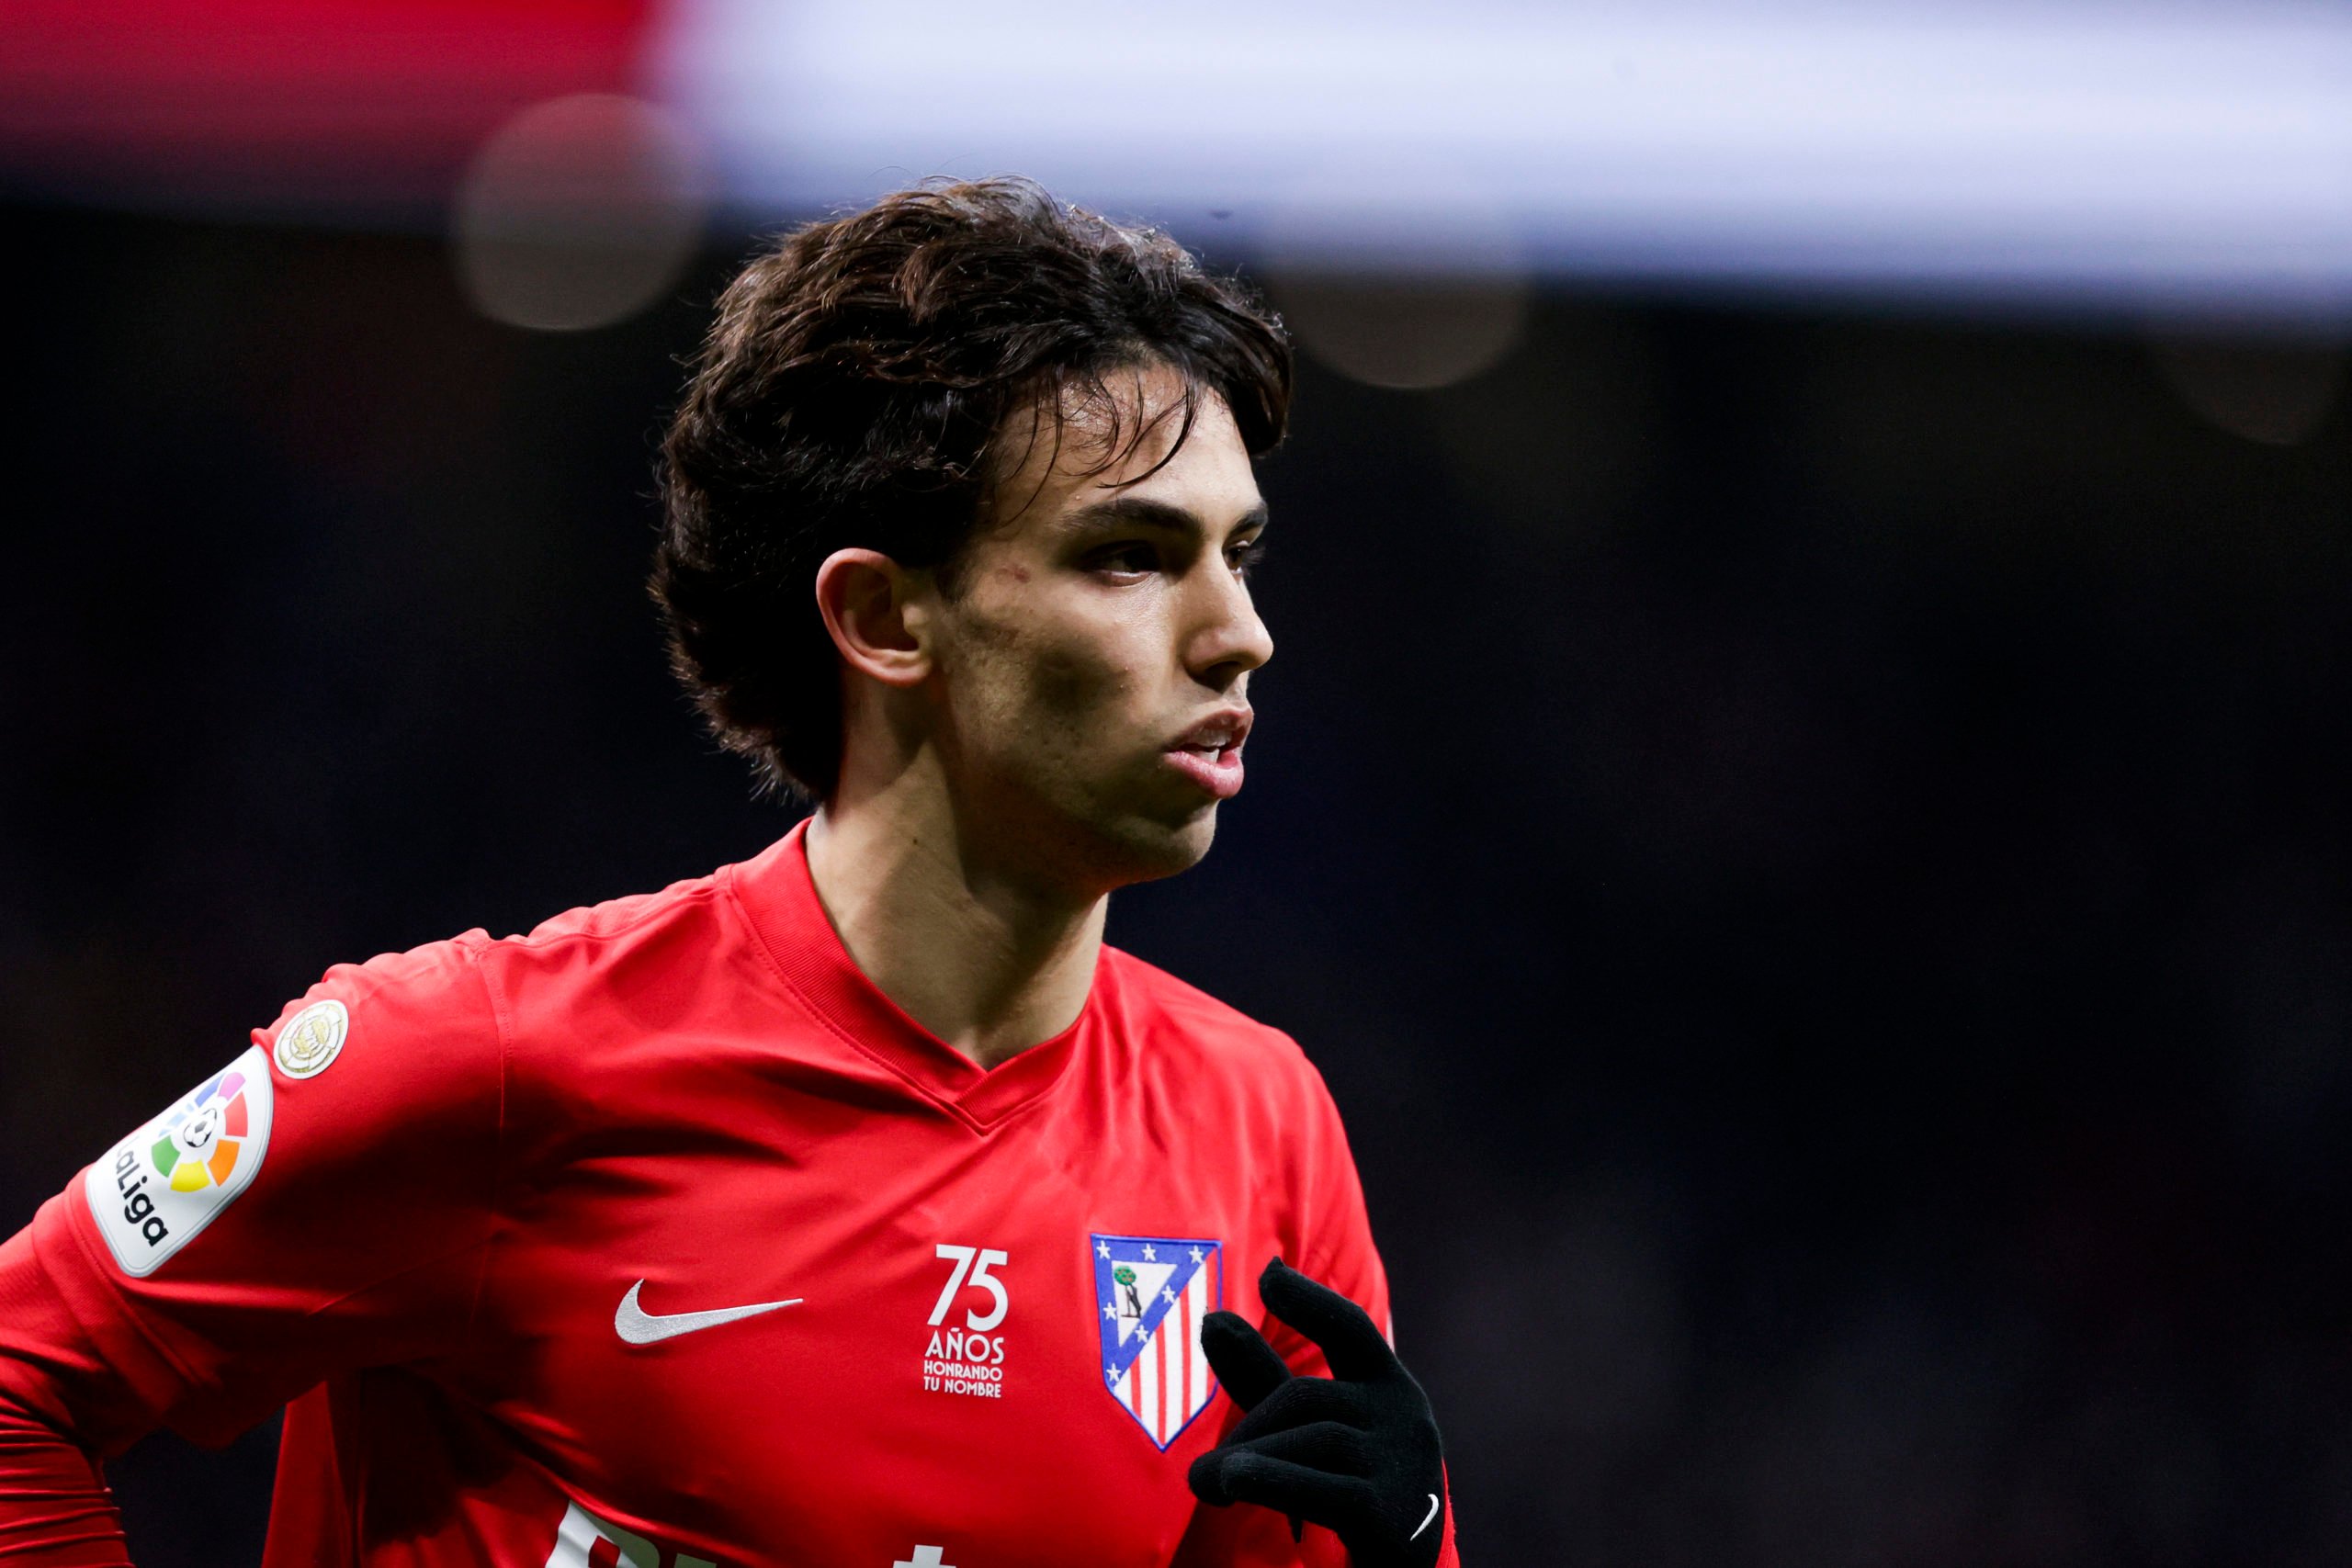 Joao Felix ‘wants to leave’ Atletico and Manchester United should move